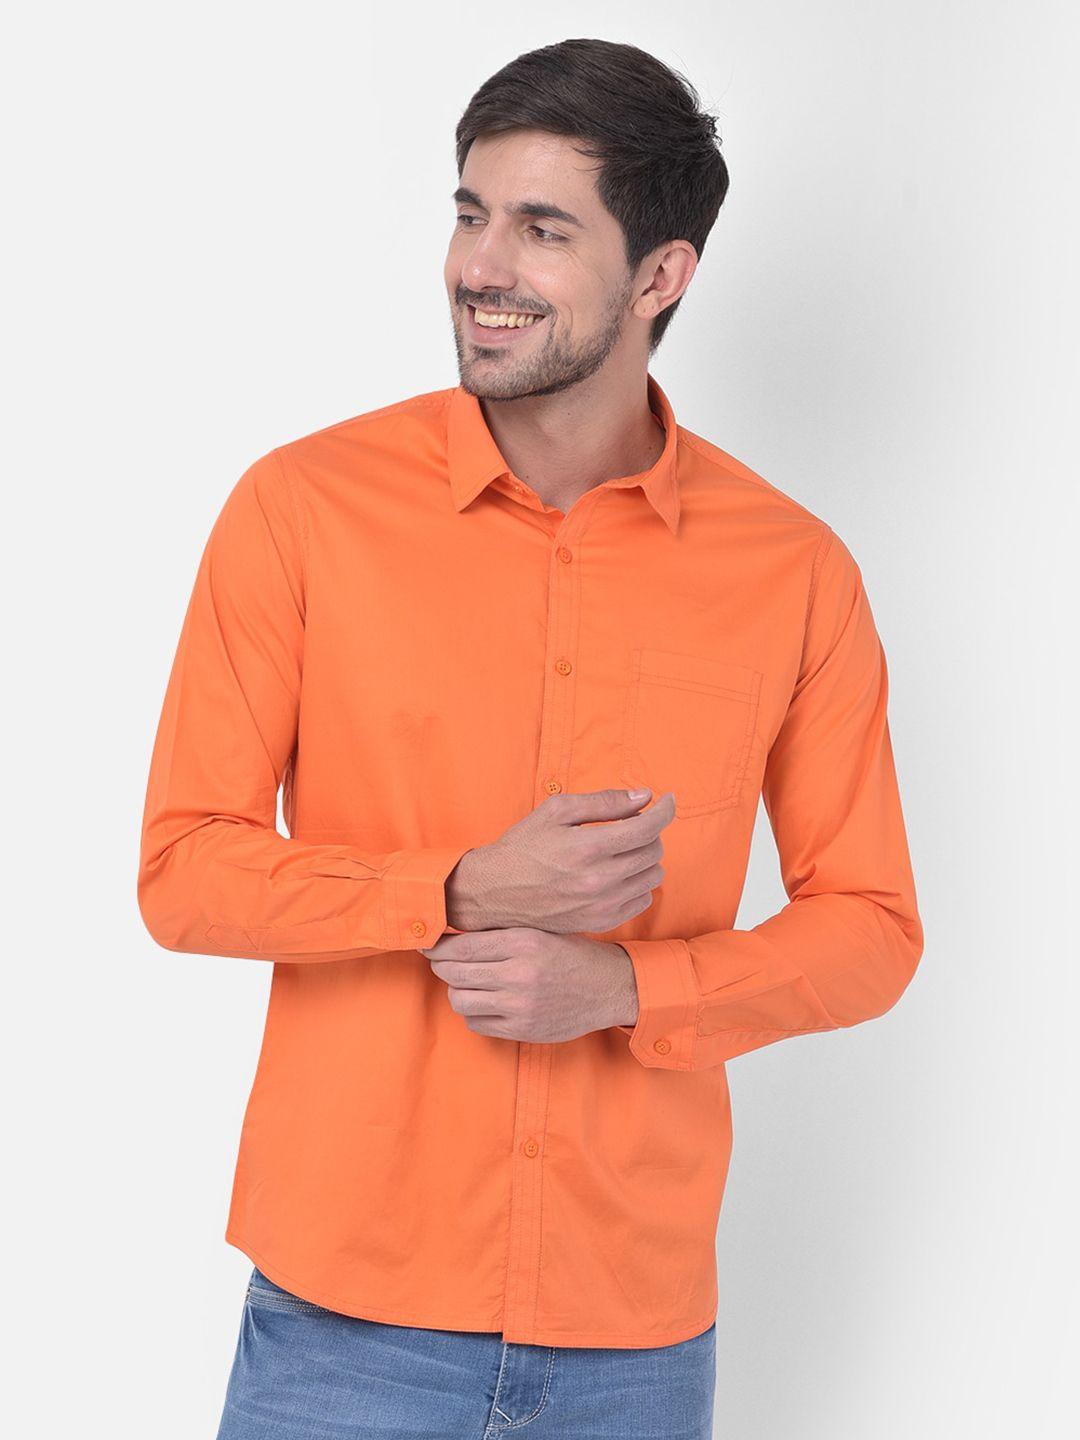 canary-london-spread-collar-cotton-slim-fit-casual-shirt